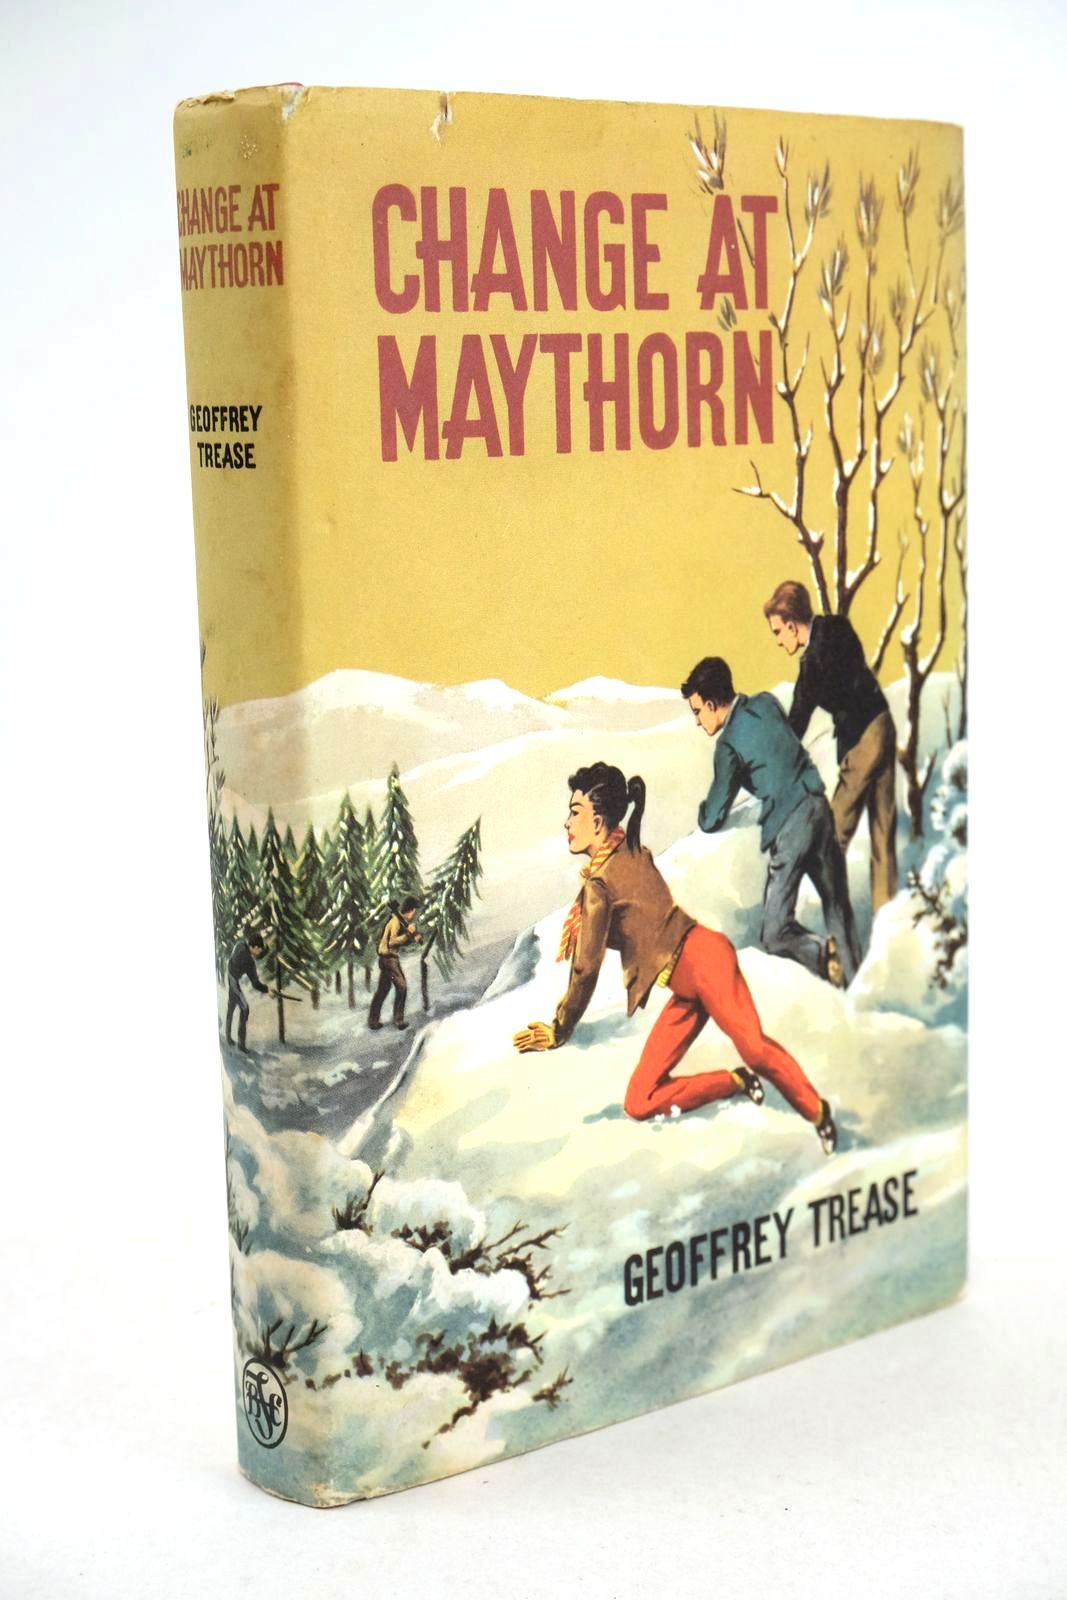 Photo of CHANGE AT MAYTHORN written by Trease, Geoffrey illustrated by Hodgson, Robert published by The Children's Book Club (STOCK CODE: 1326209)  for sale by Stella & Rose's Books